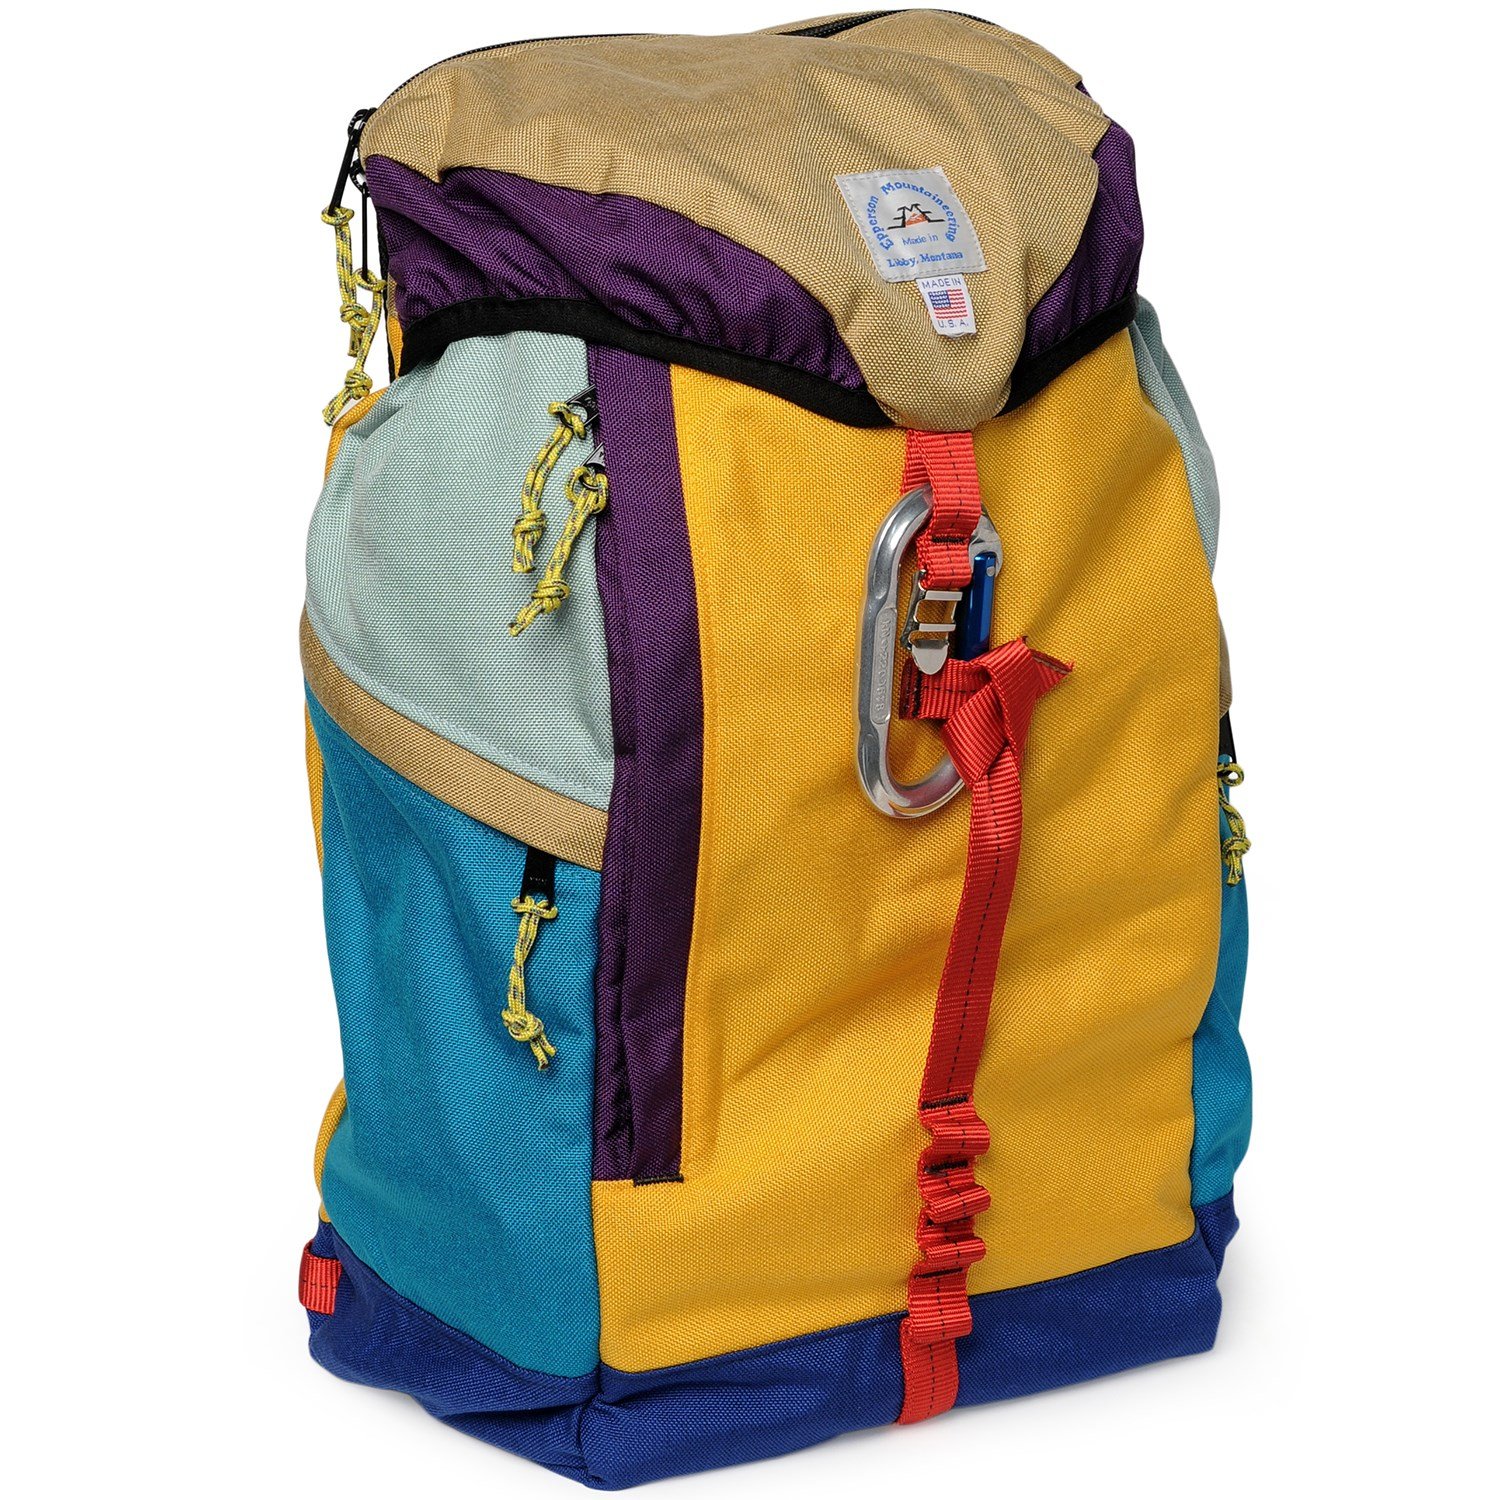 Epperson Mountaineering Large Climb Pack | evo